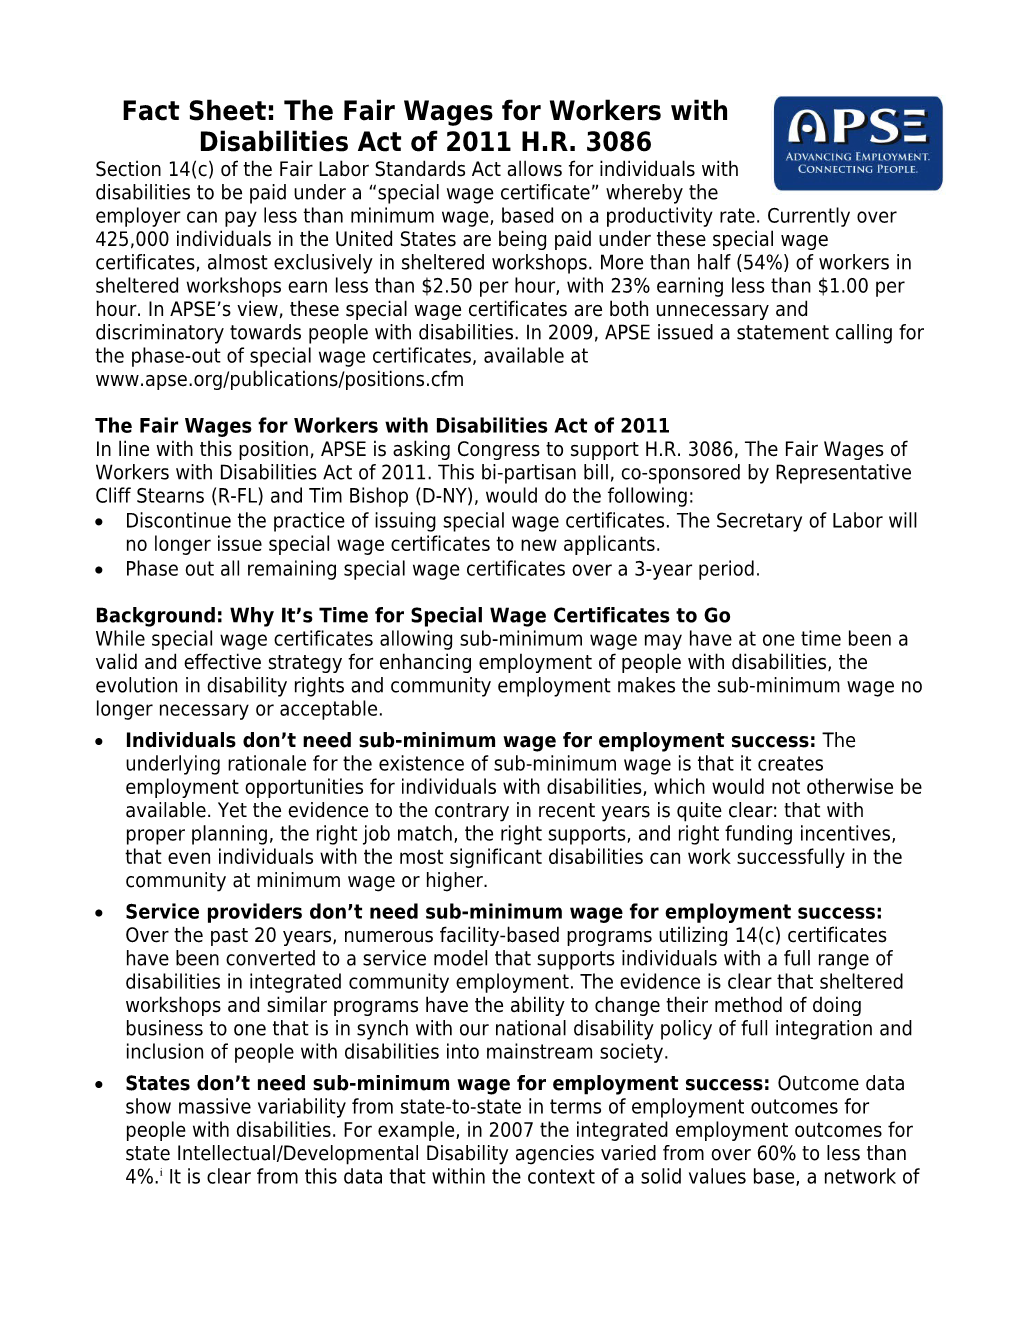 The Fair Wages for Workers with Disabilities Act of 2011